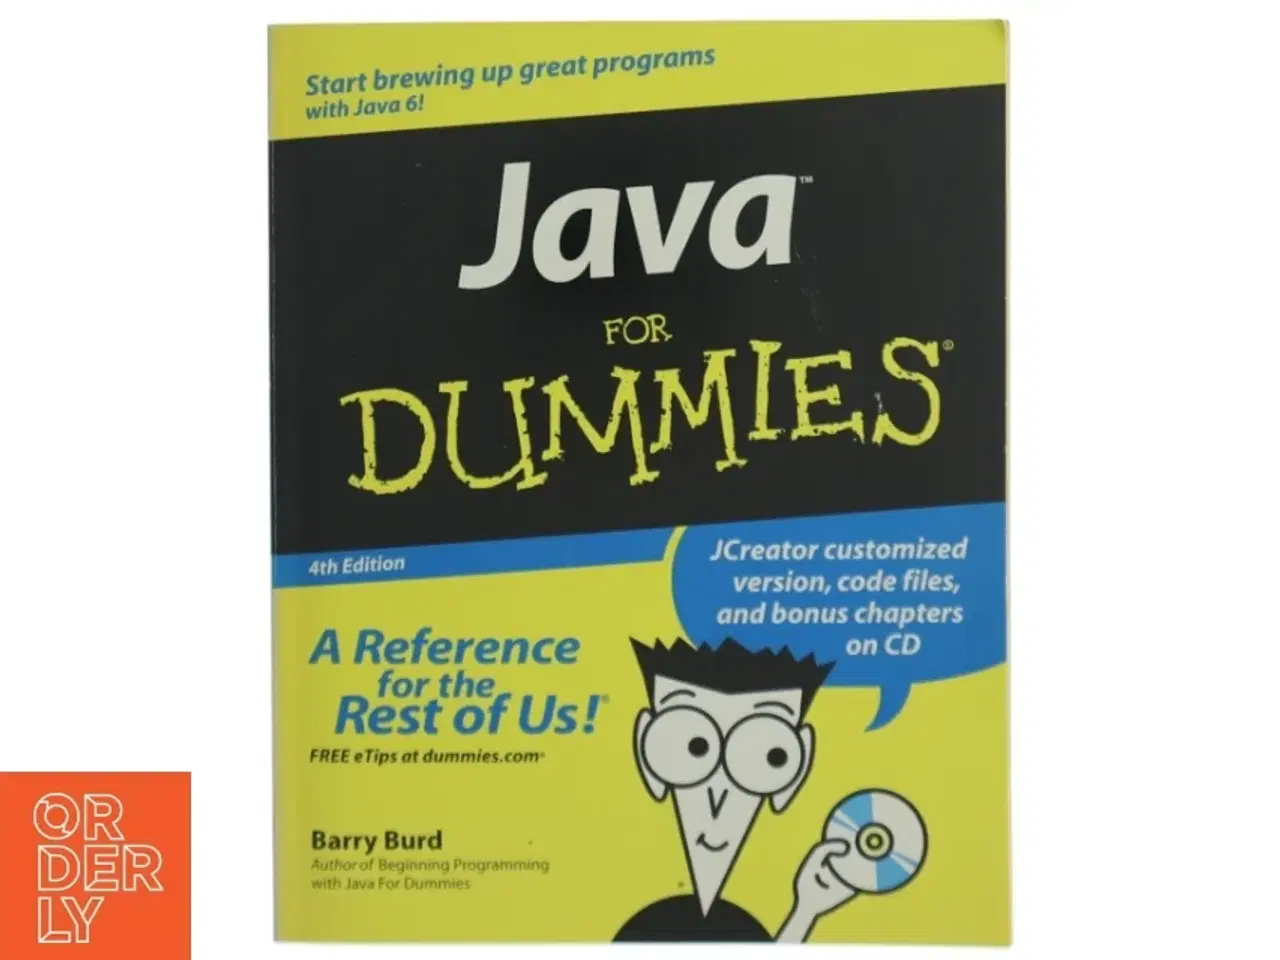 Billede 1 - Java for Dummies, 4th Edition fra Wiley